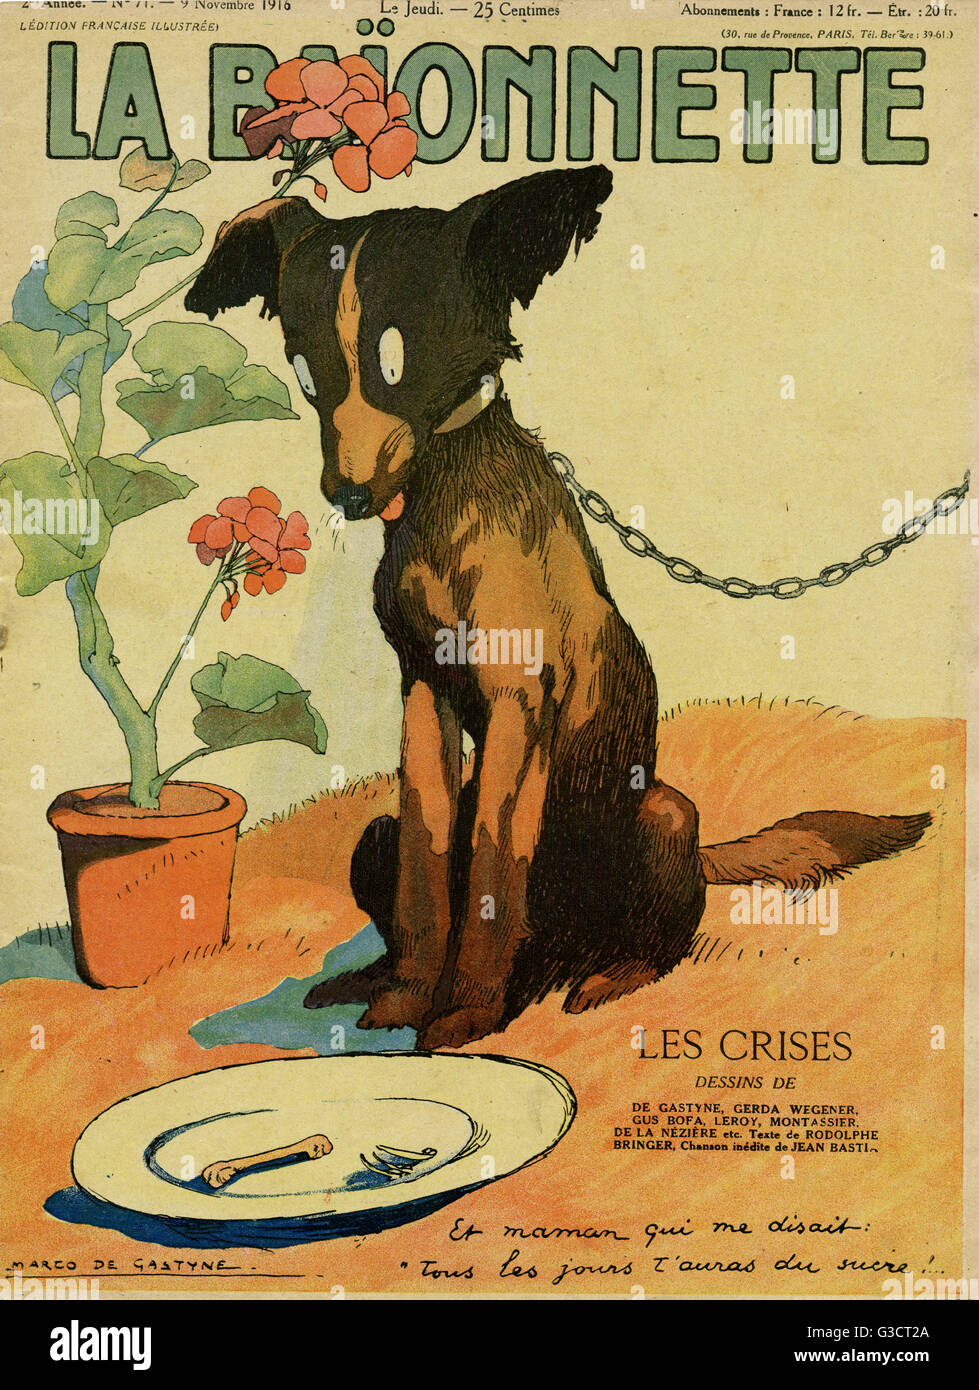 Front cover design for La Baionnette, an issue focusing on crises during the First World War.  A little dog looks at a few meagre bones on a plate and thinks: Mother told me I would have sugar every day!      Date: 1916 Stock Photo